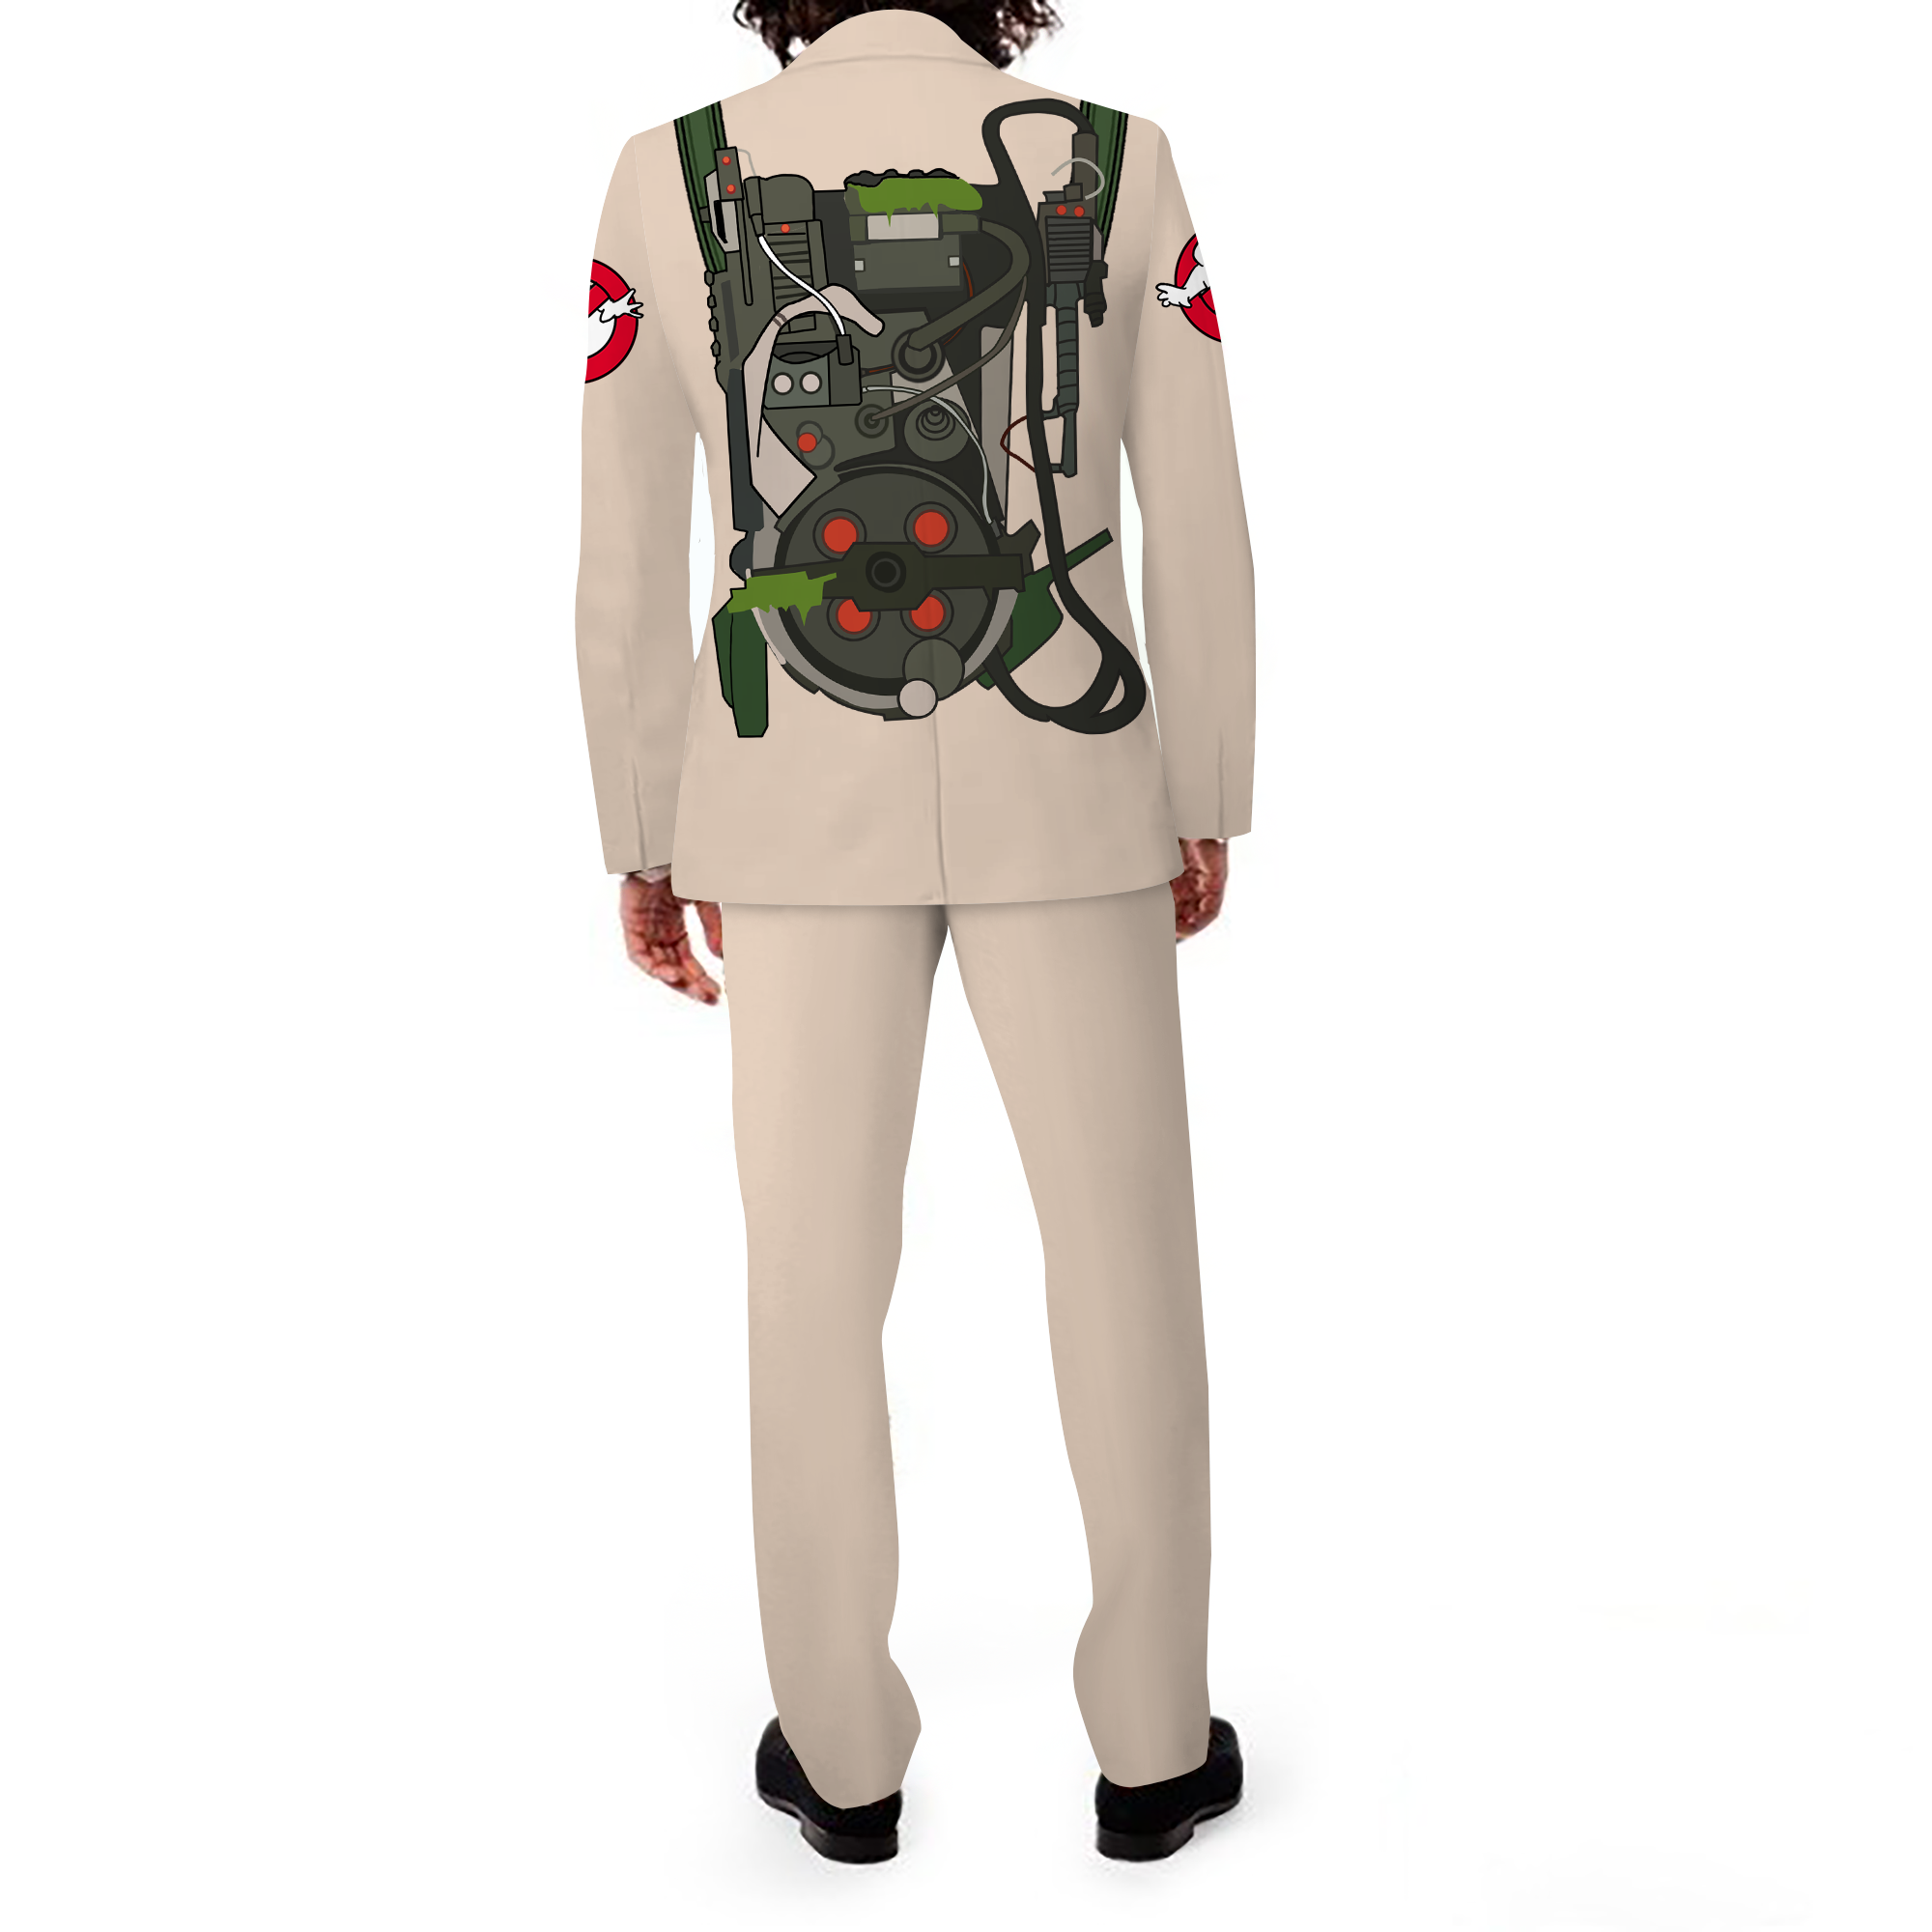 Rulercosplay Ghostbusters Men Slim Fit Suit Separates Jacket Slim 2 Button Blazer Pants For Party